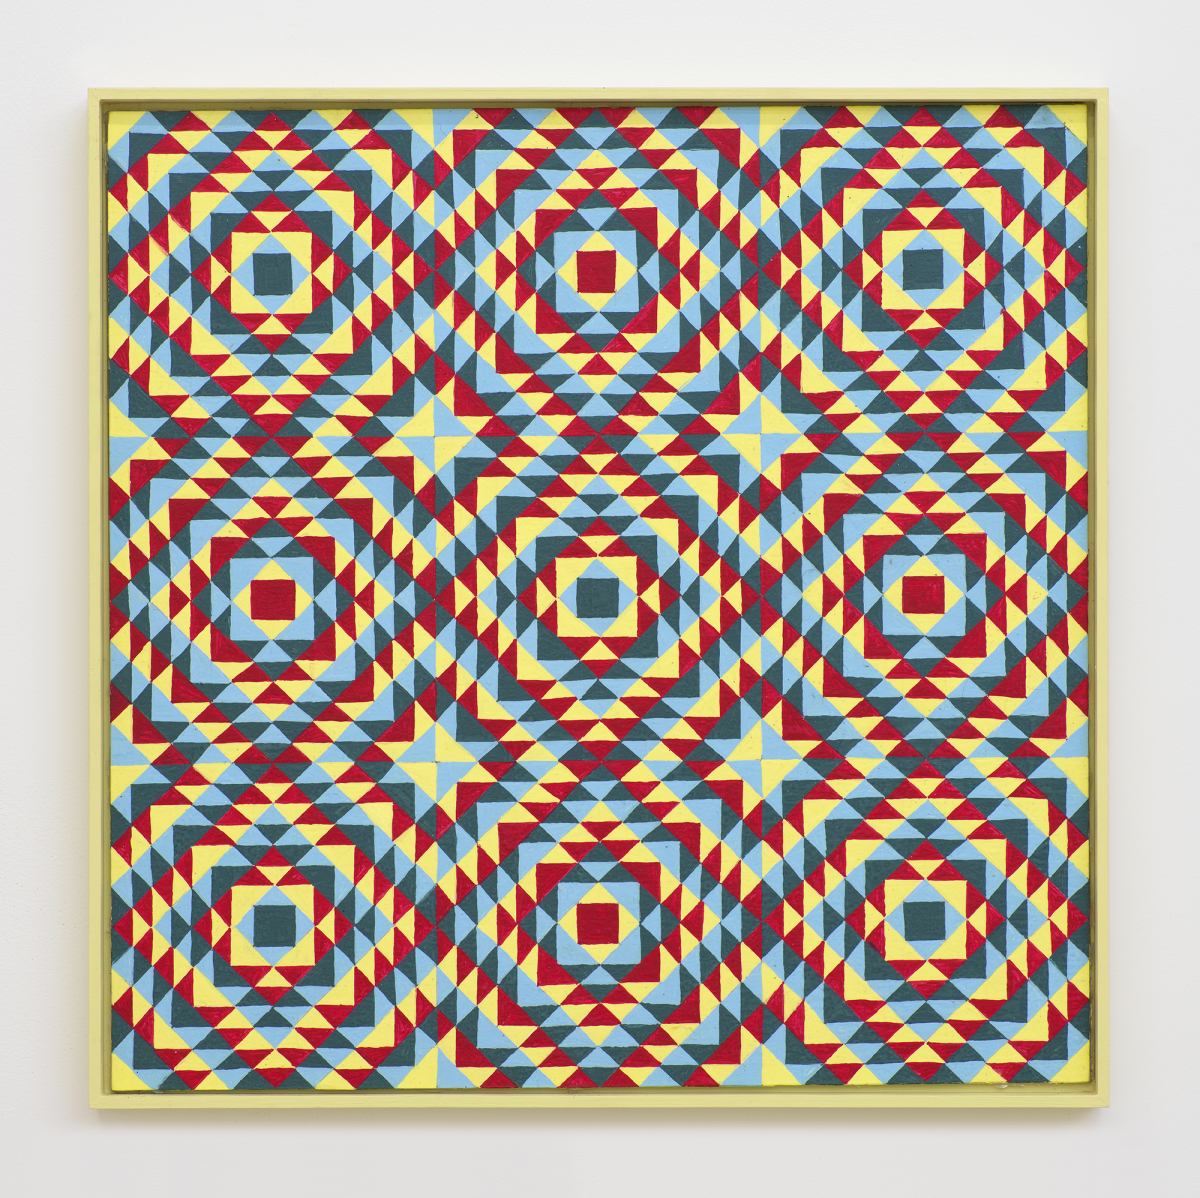 On a white wall a painting depicting a grid of crisscrossing lines generating many repeating rectangles, and triangles. The dominant colors are hues of yellow, red, and blue. The frame is painted yellow. 
